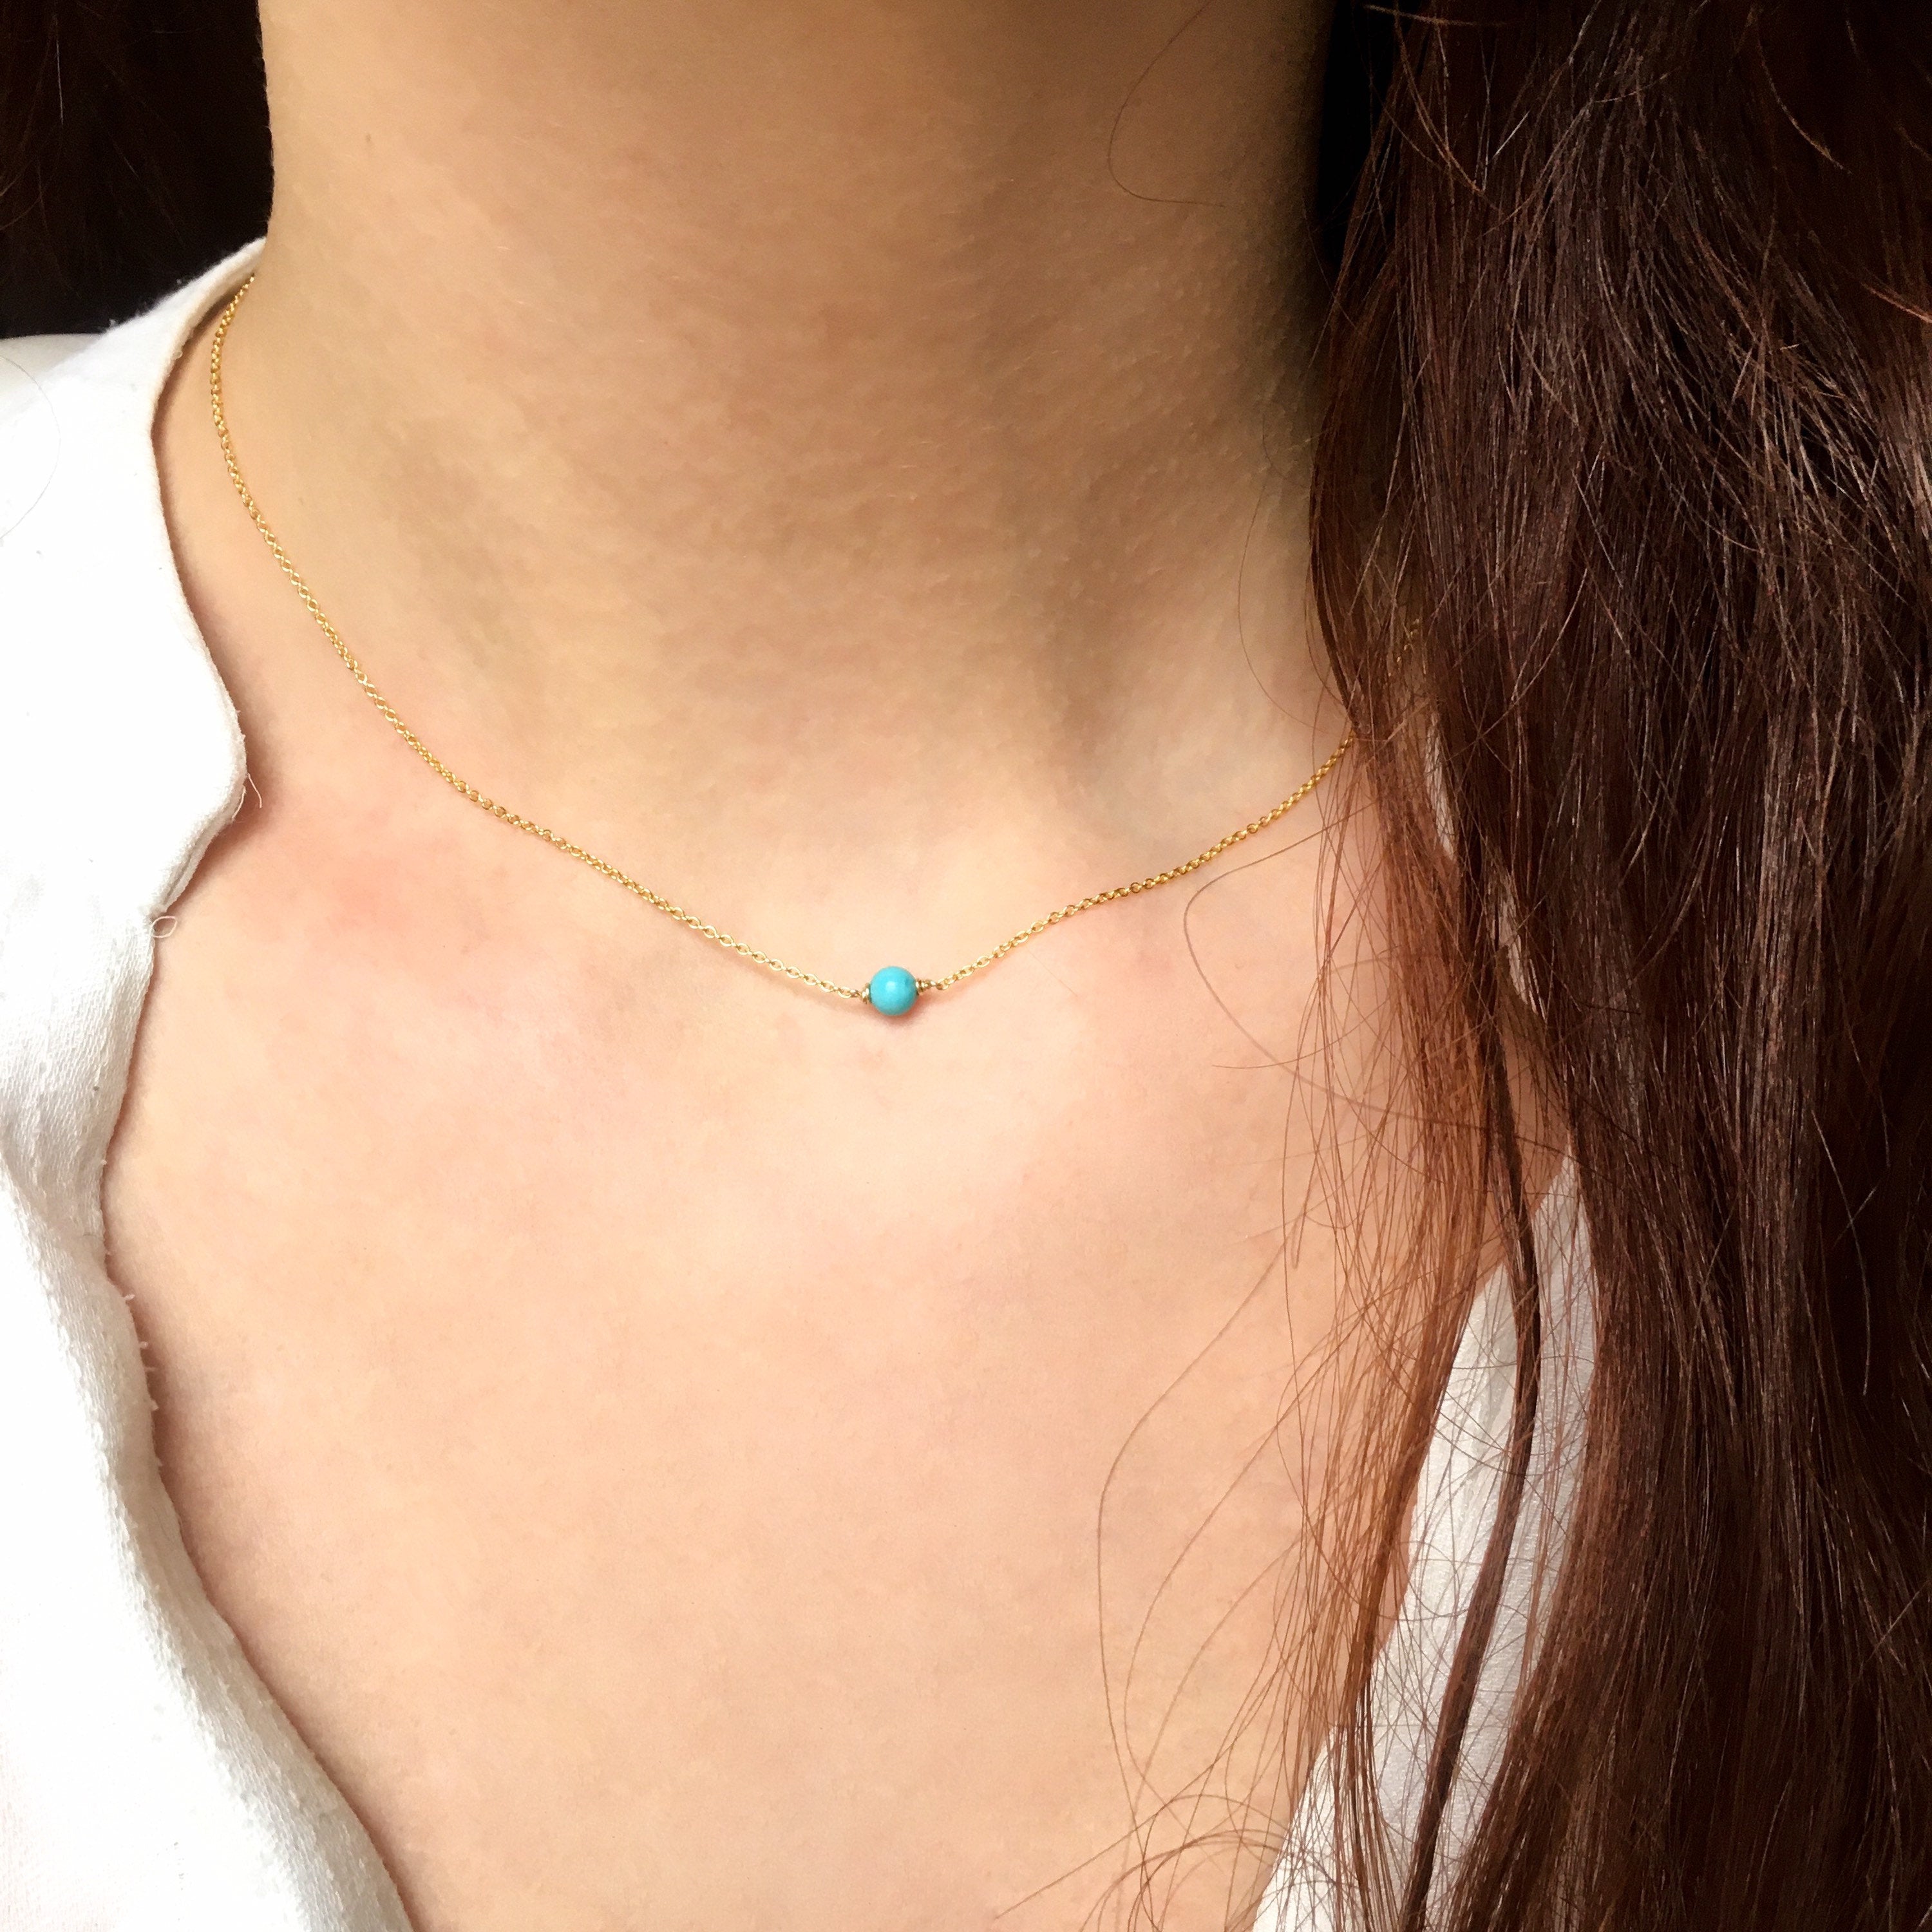 Buy Dainty Turquoise Necklace, Delicate Turquoise Gemstone Necklace,  Genuine Turquoise Pendant Necklace, Turquoise Jewelry, Layering Necklace  Online in India - Etsy